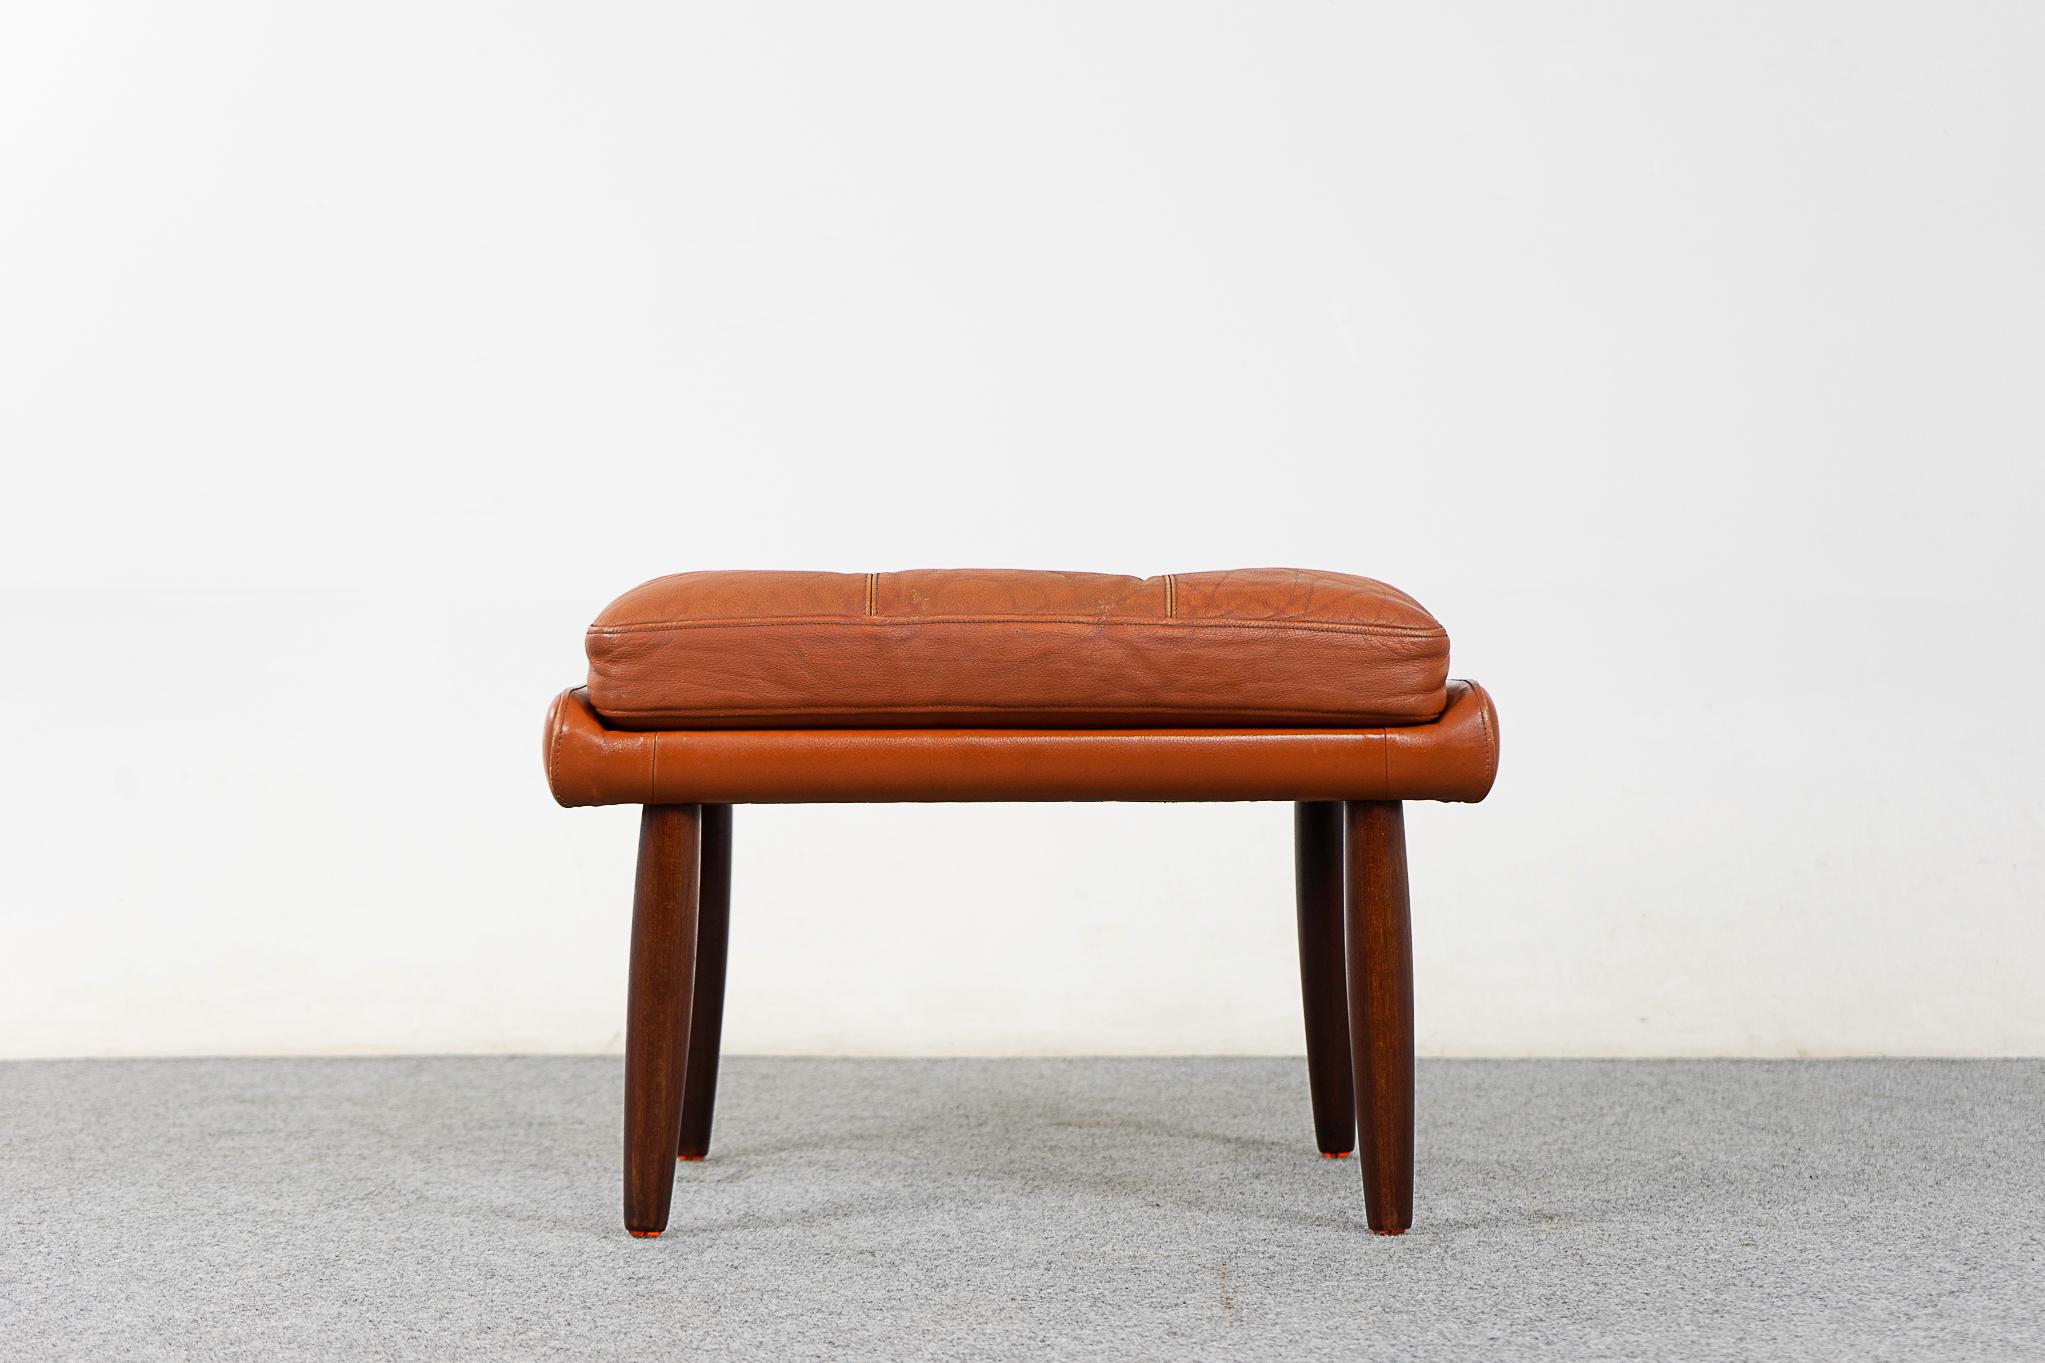 Leather & teak footstool, circa 1960's. Original tufted leather in nice condition. Tapering teak sleek legs!

Please inquire for international and remote shipping rates.